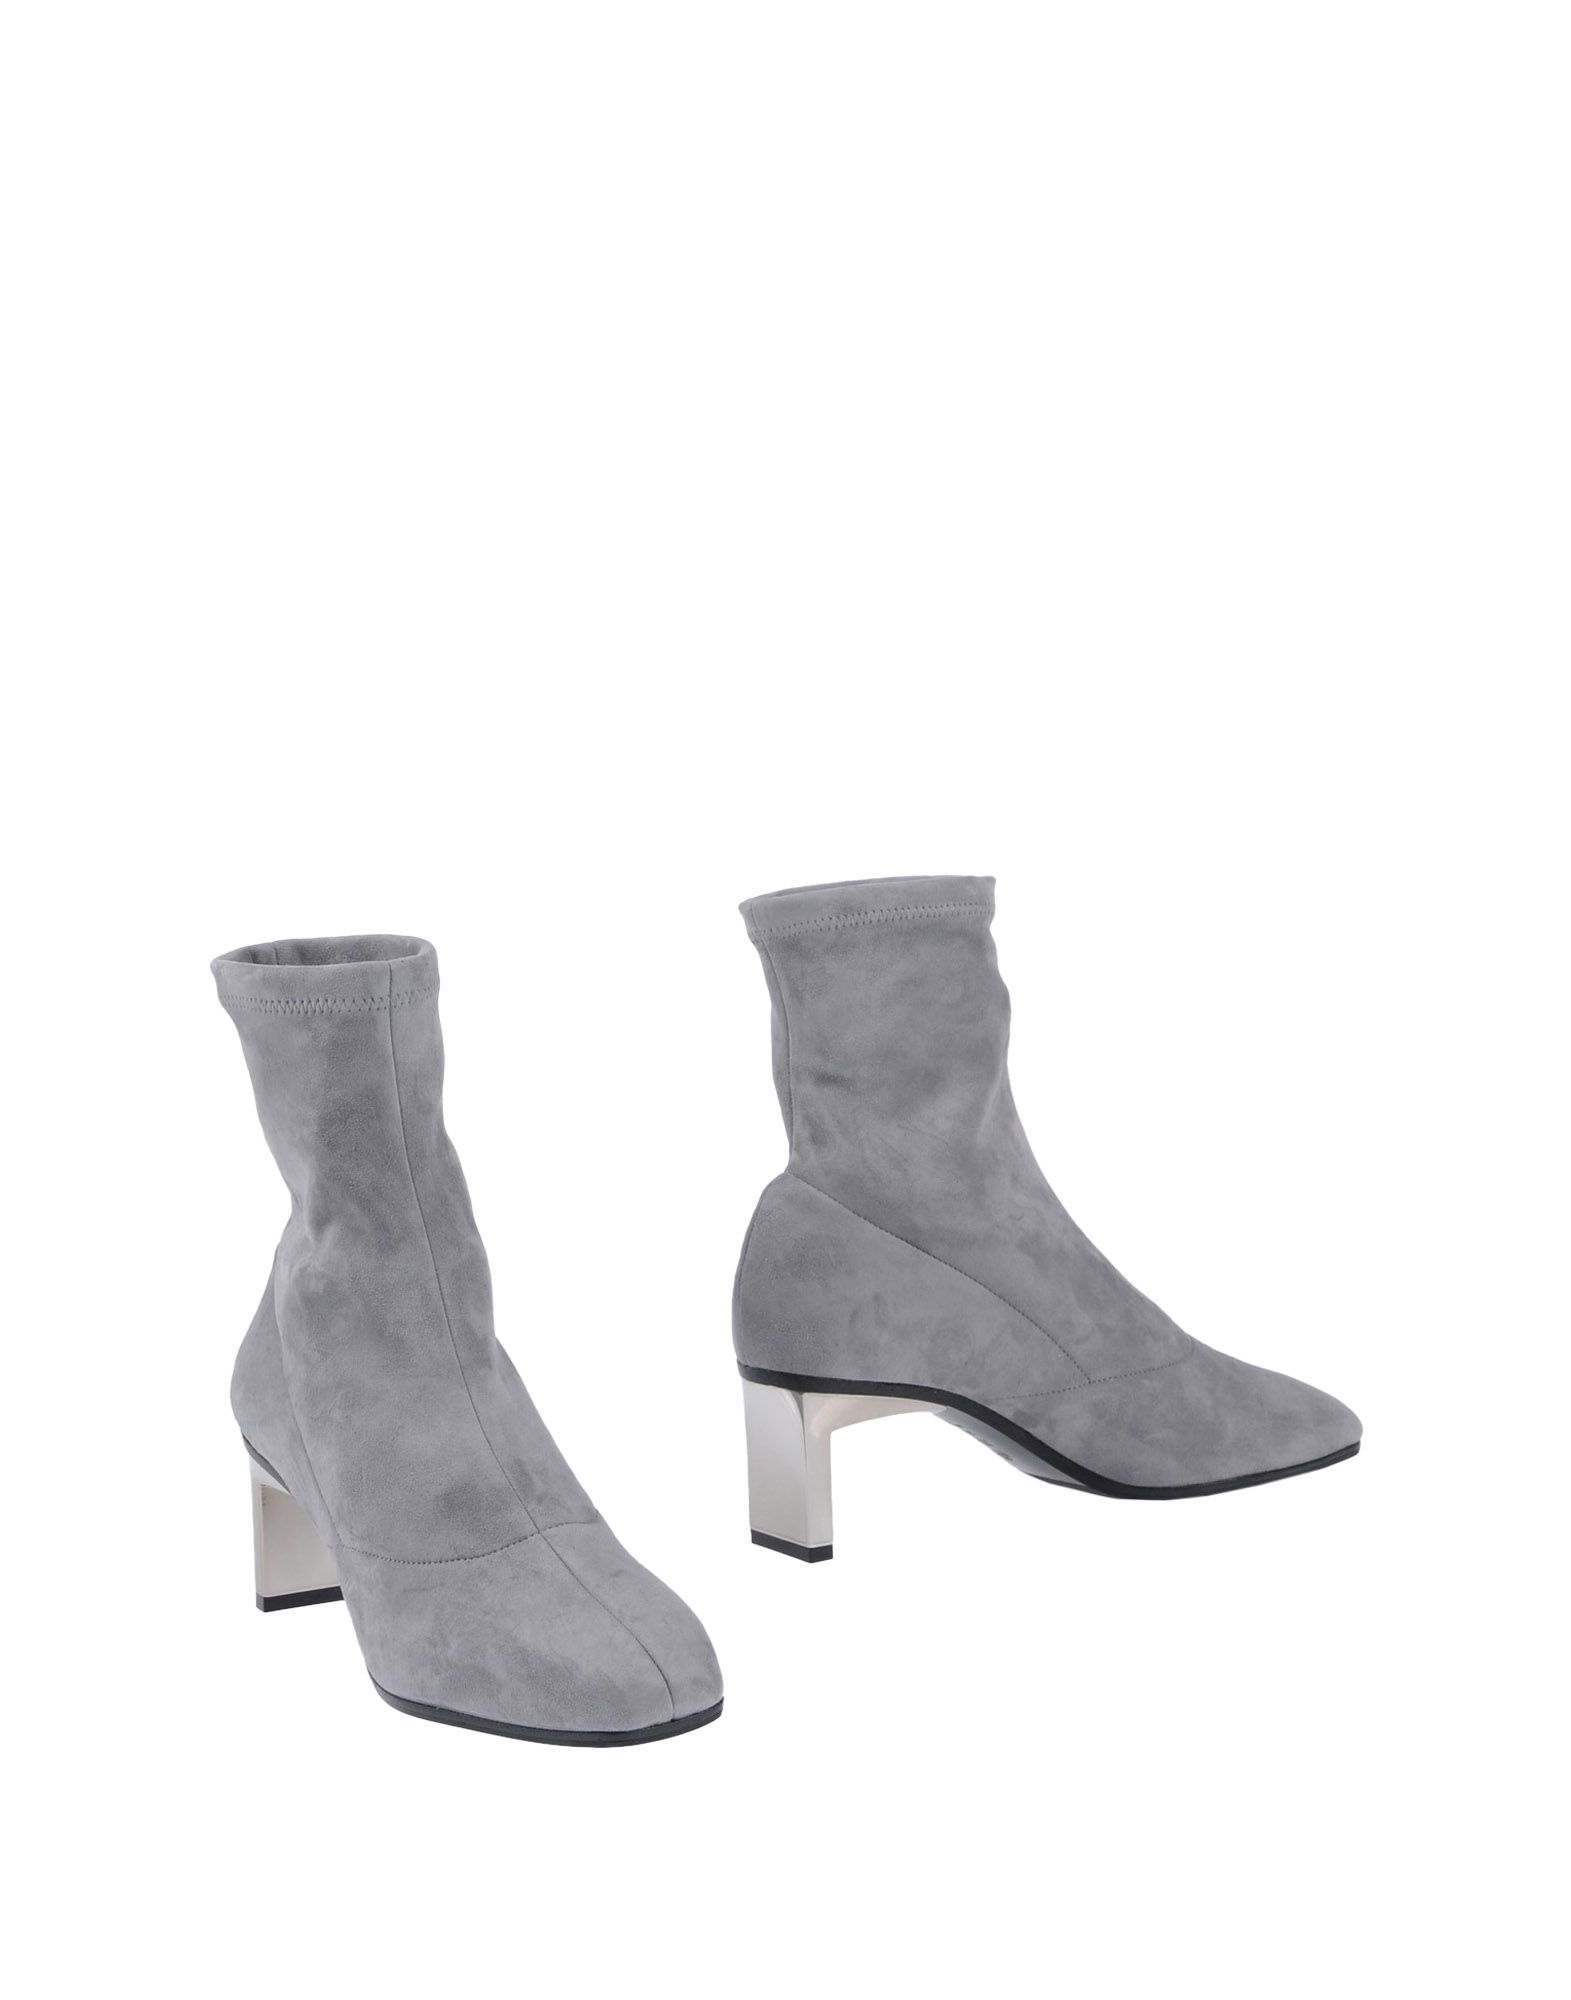 3.1 PHILLIP LIM / フィリップ リム ANKLE BOOTS,11463244PK 14